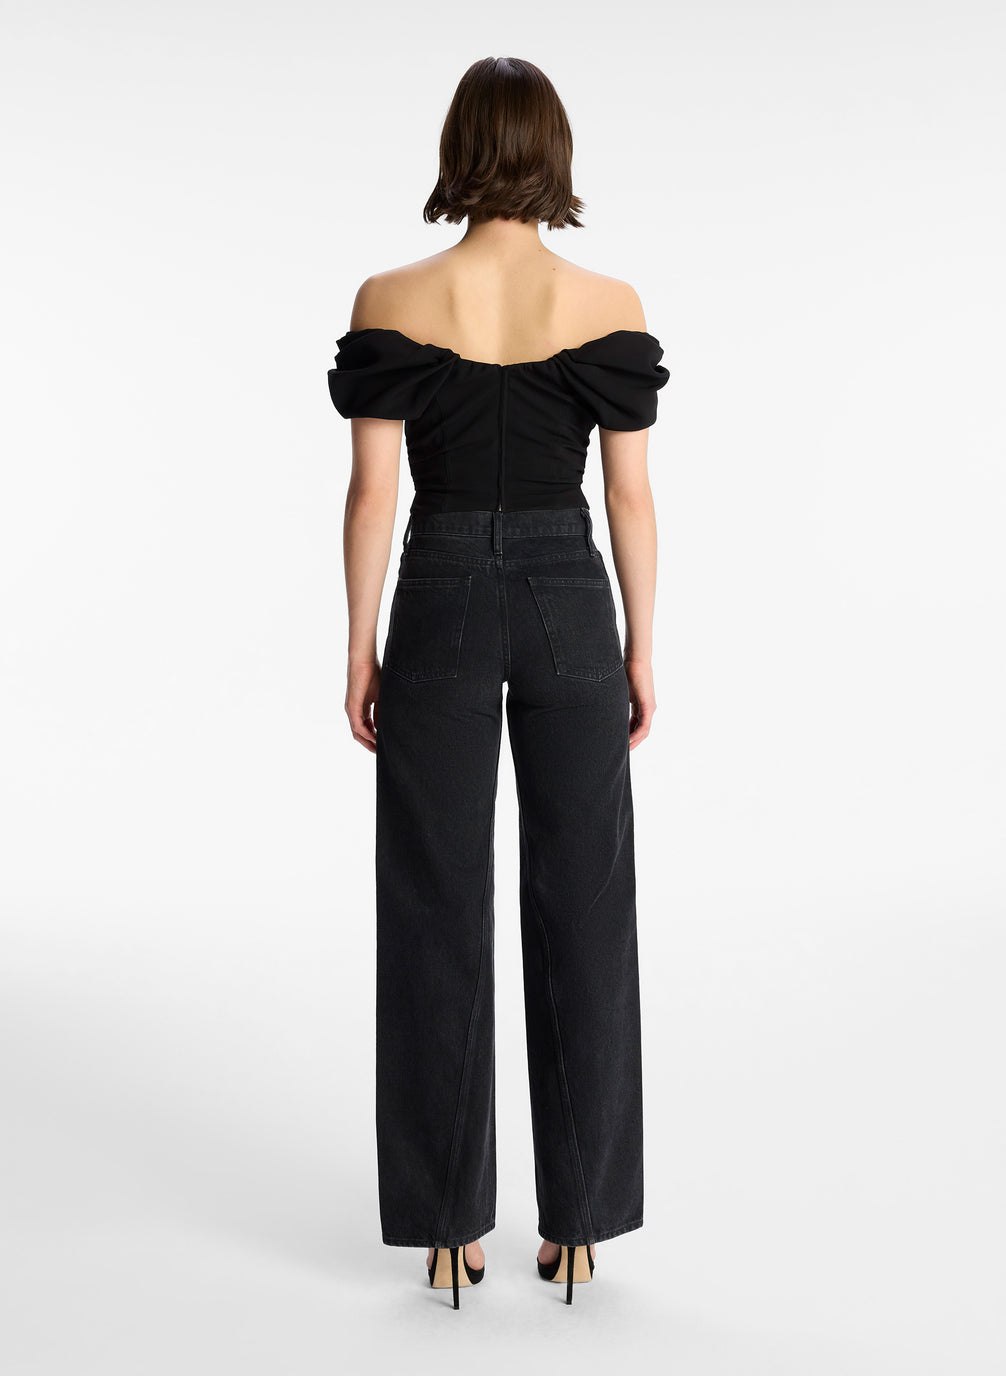 back view of woman wearing black off shoulder puff sleeve top and dark wash denim jeans